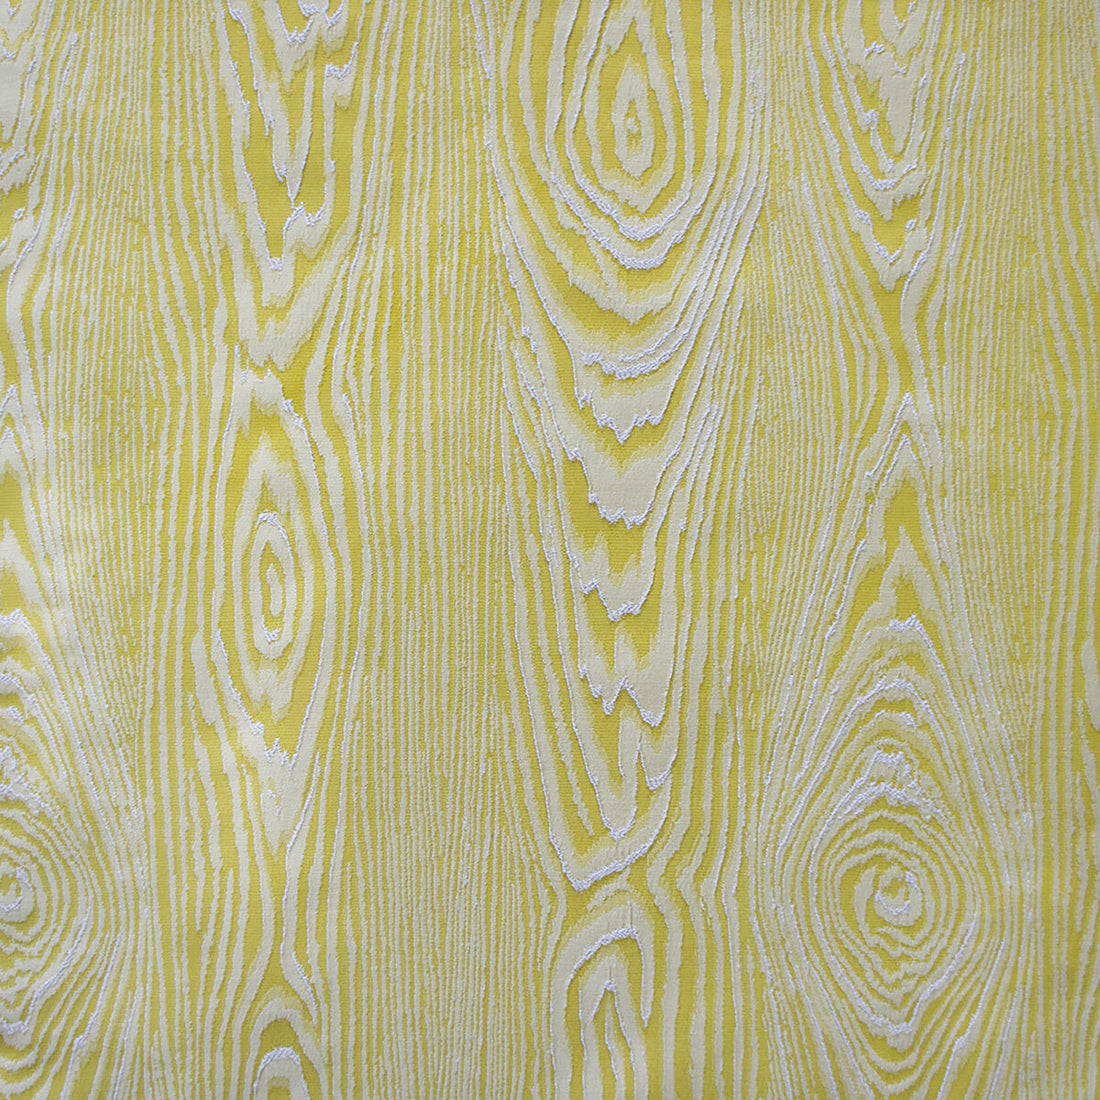 Haru fabric in amarillo color - pattern GDT5630.002.0 - by Gaston y Daniela in the Gaston Japon collection